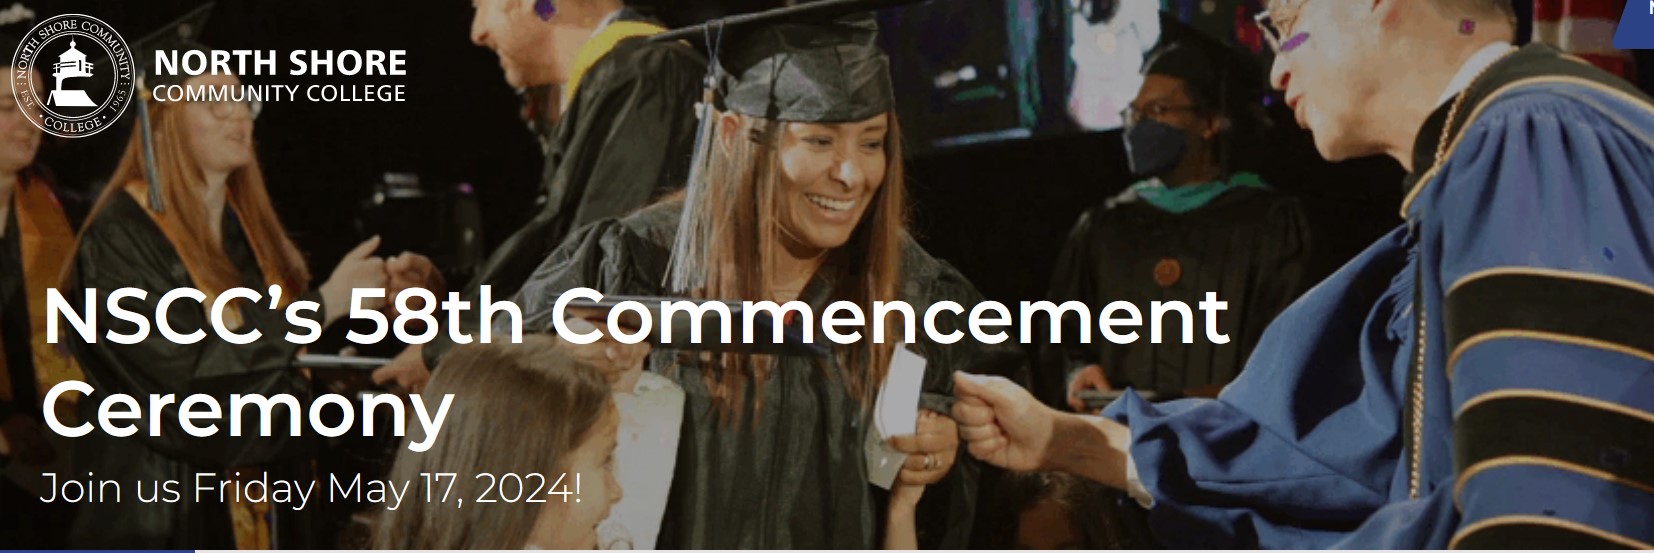 2024 Commencement Banner